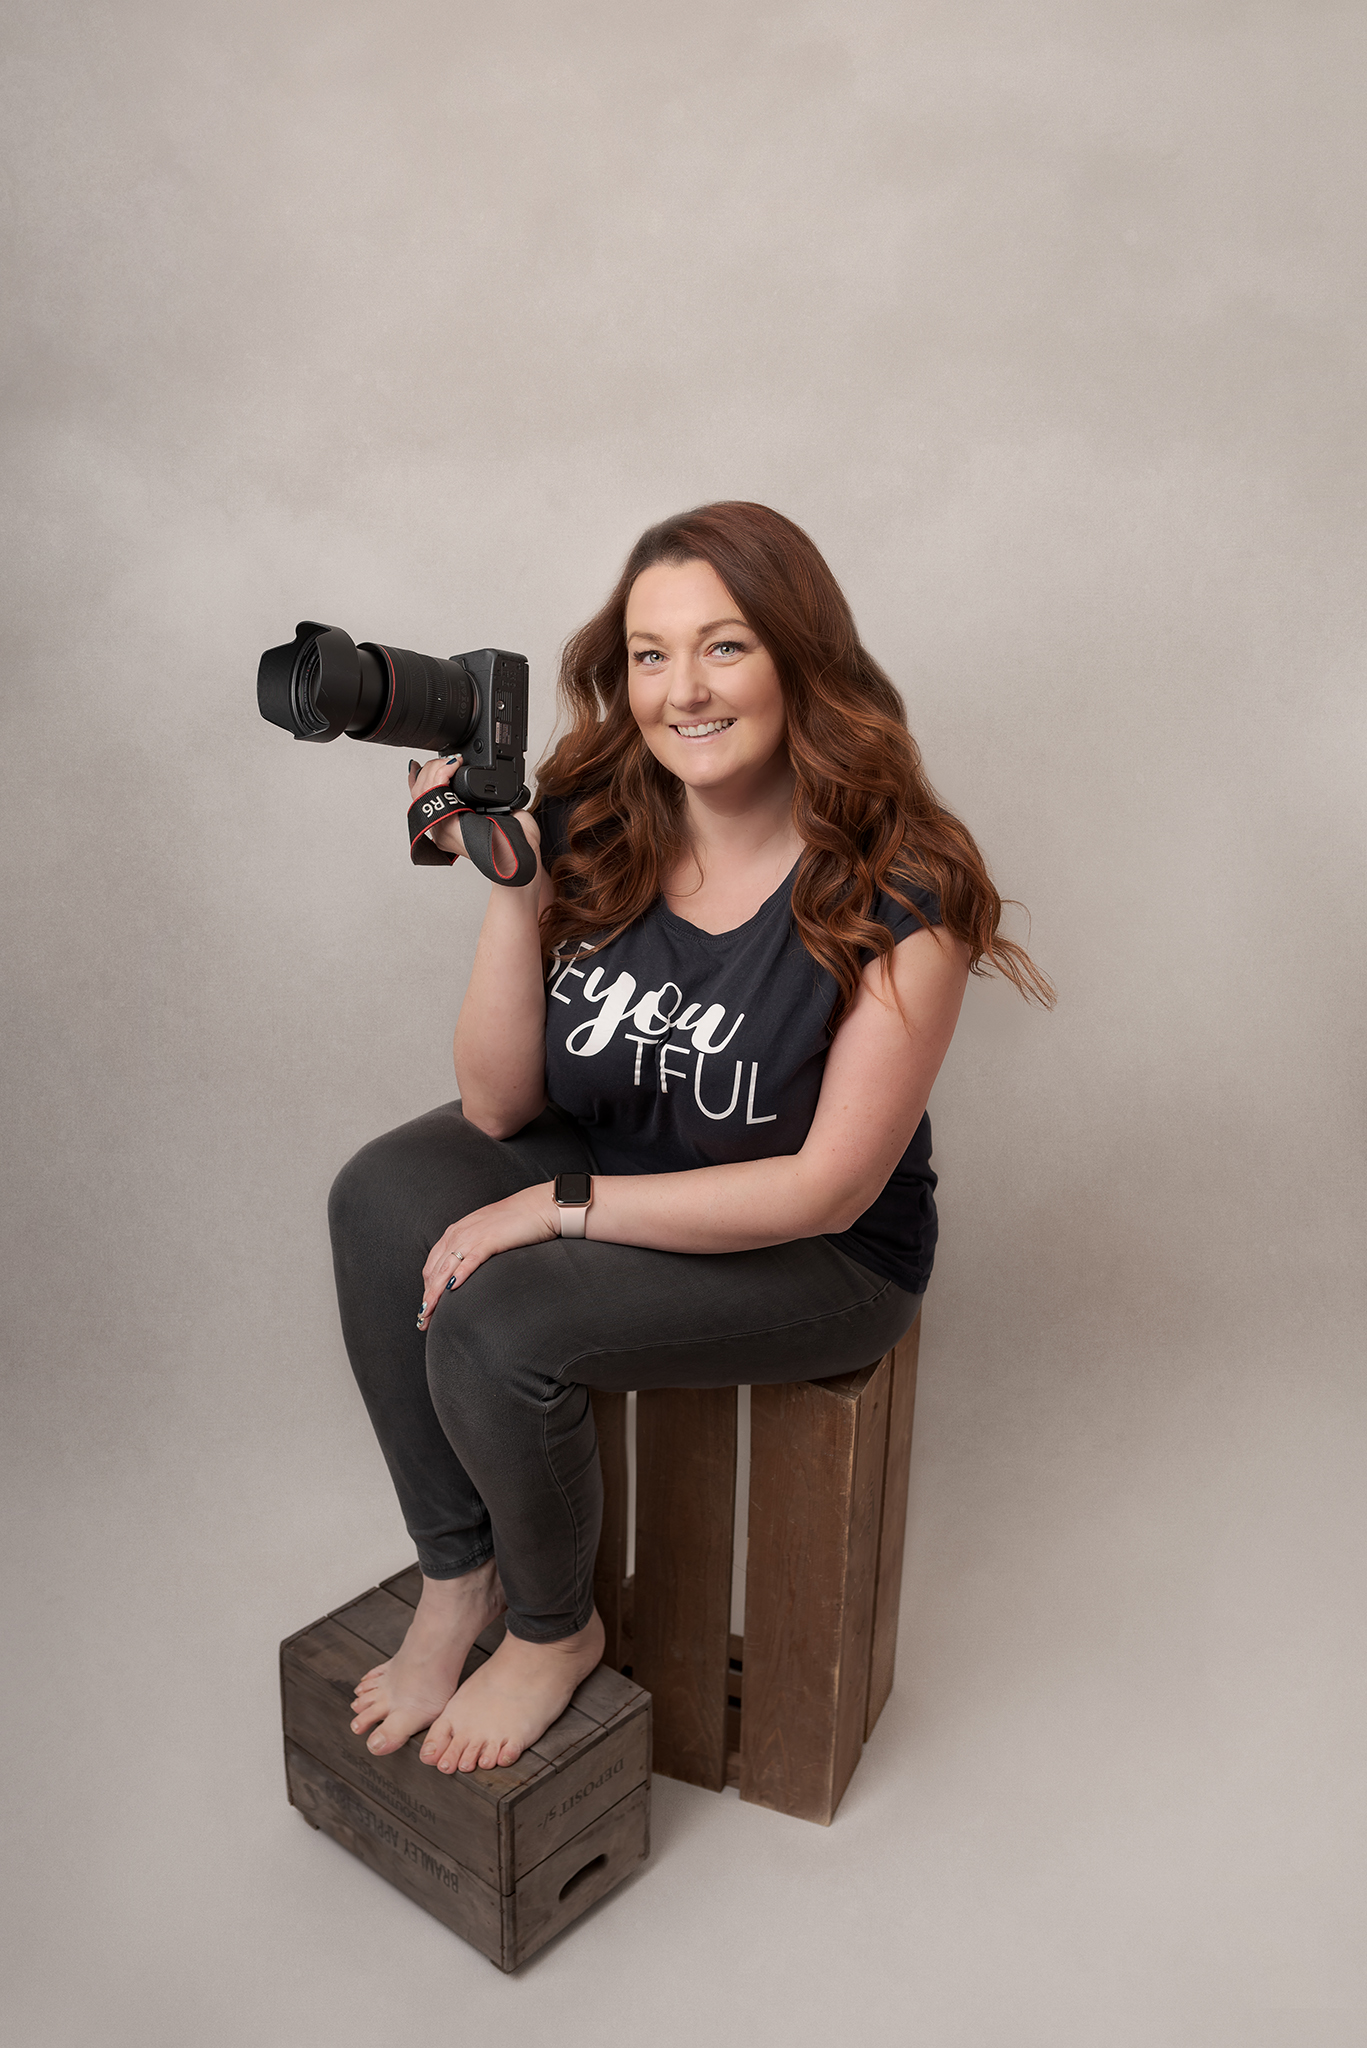 Photographer from Sutton Coldfield birmingham sat on a brown box holding her camera